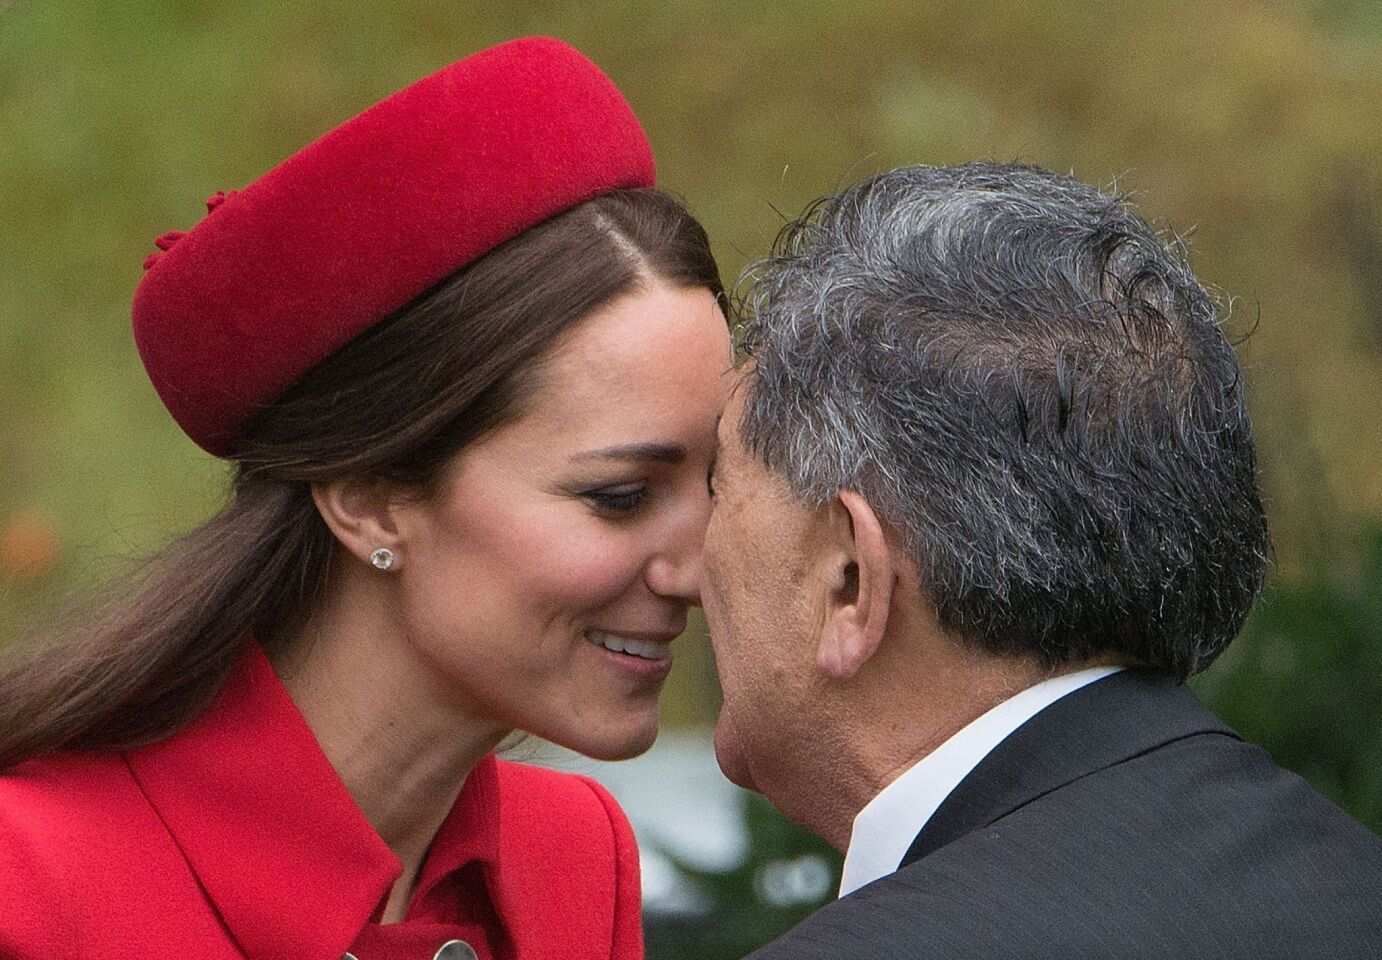 Catherine, the Duchess of Cambridge, receives a hongi, a traditional Maori greeting, by a Maori elder during a welcoming at Government House in Wellington, New Zealand's capital.